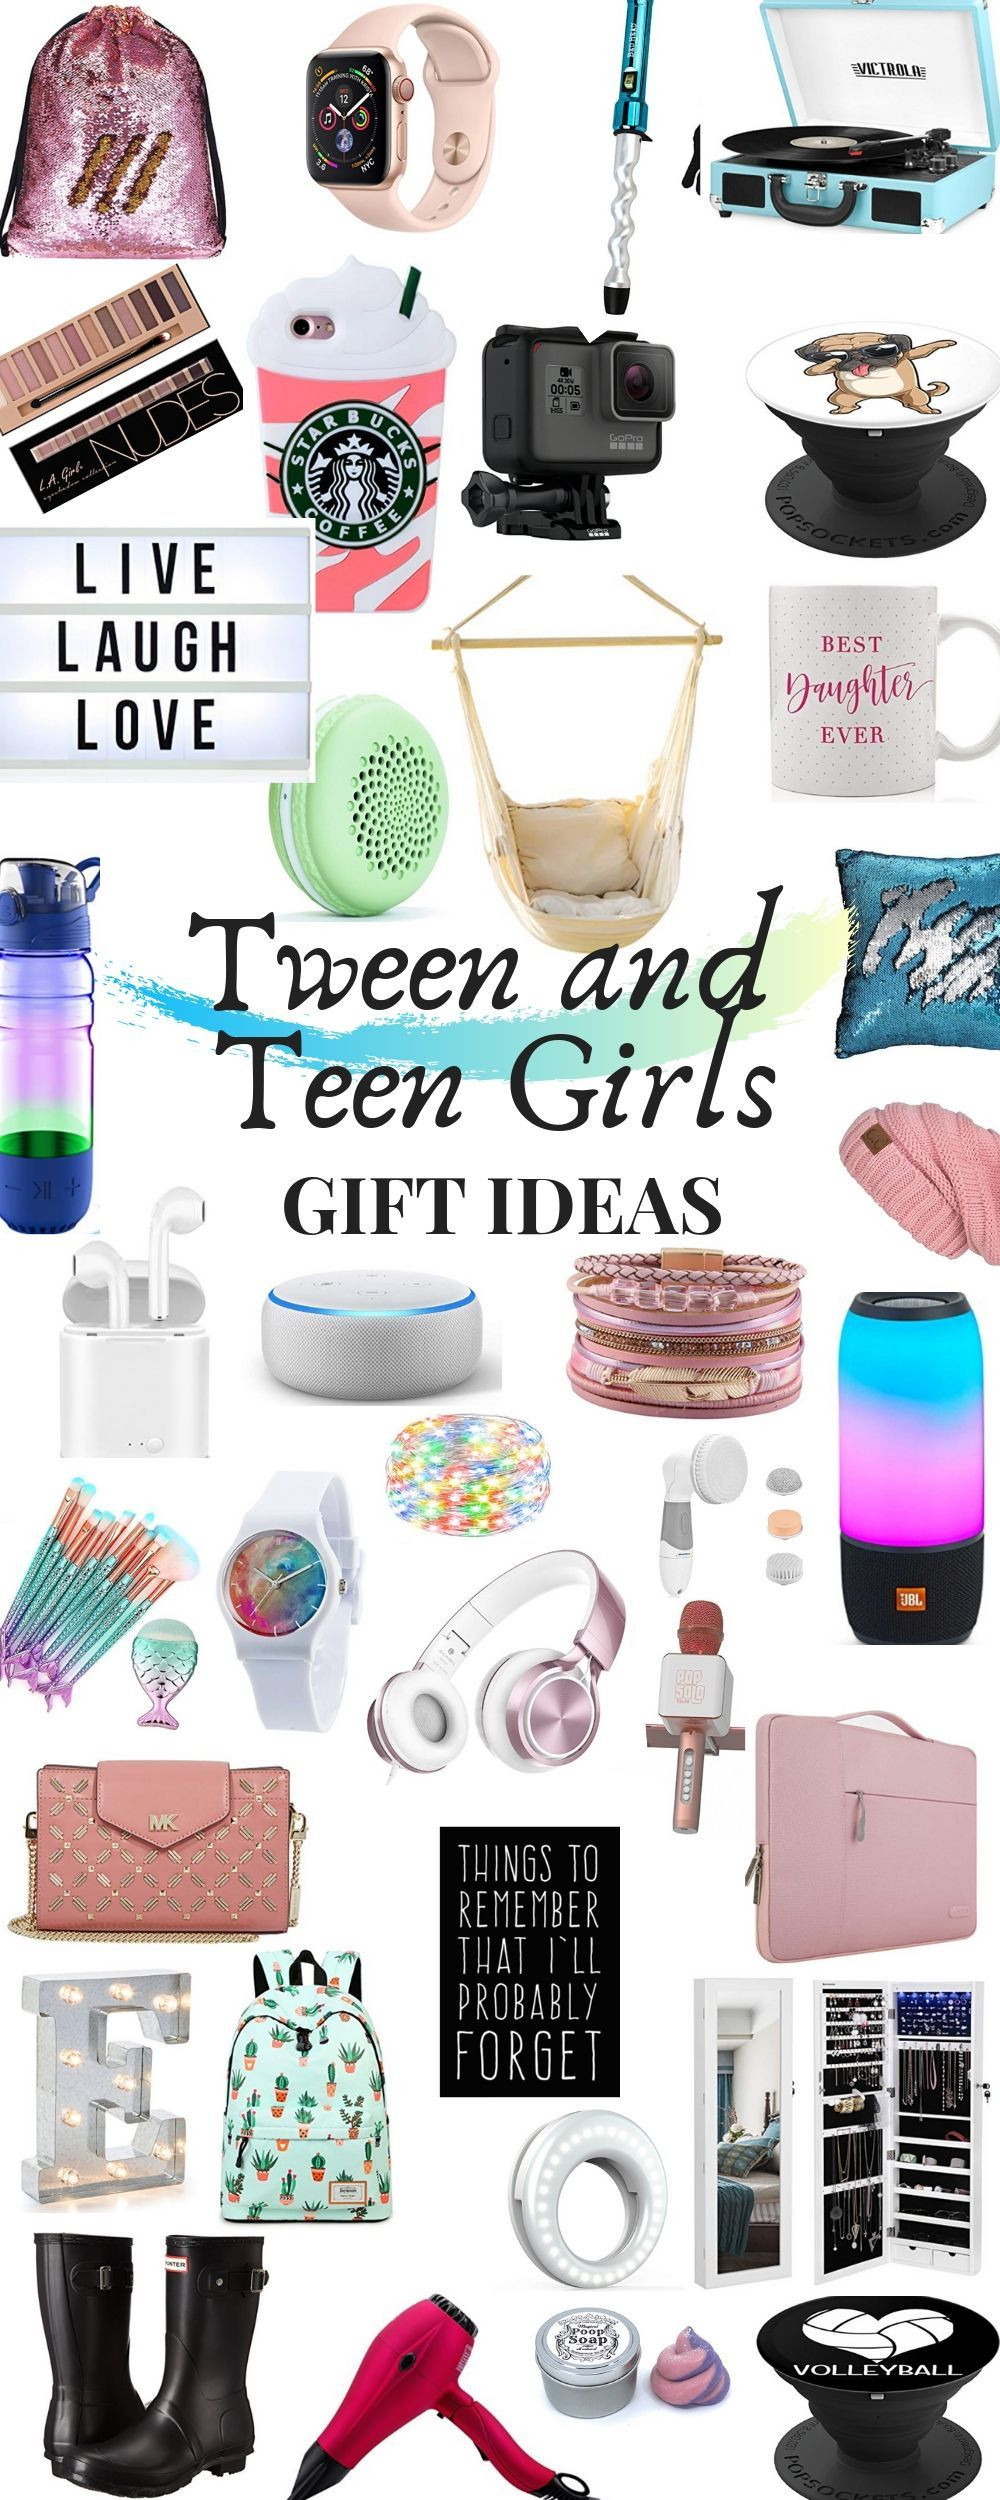 Christmas Gift Ideas 2020 For Teen Girls
 Pin on Gift Ideas for Teenagers